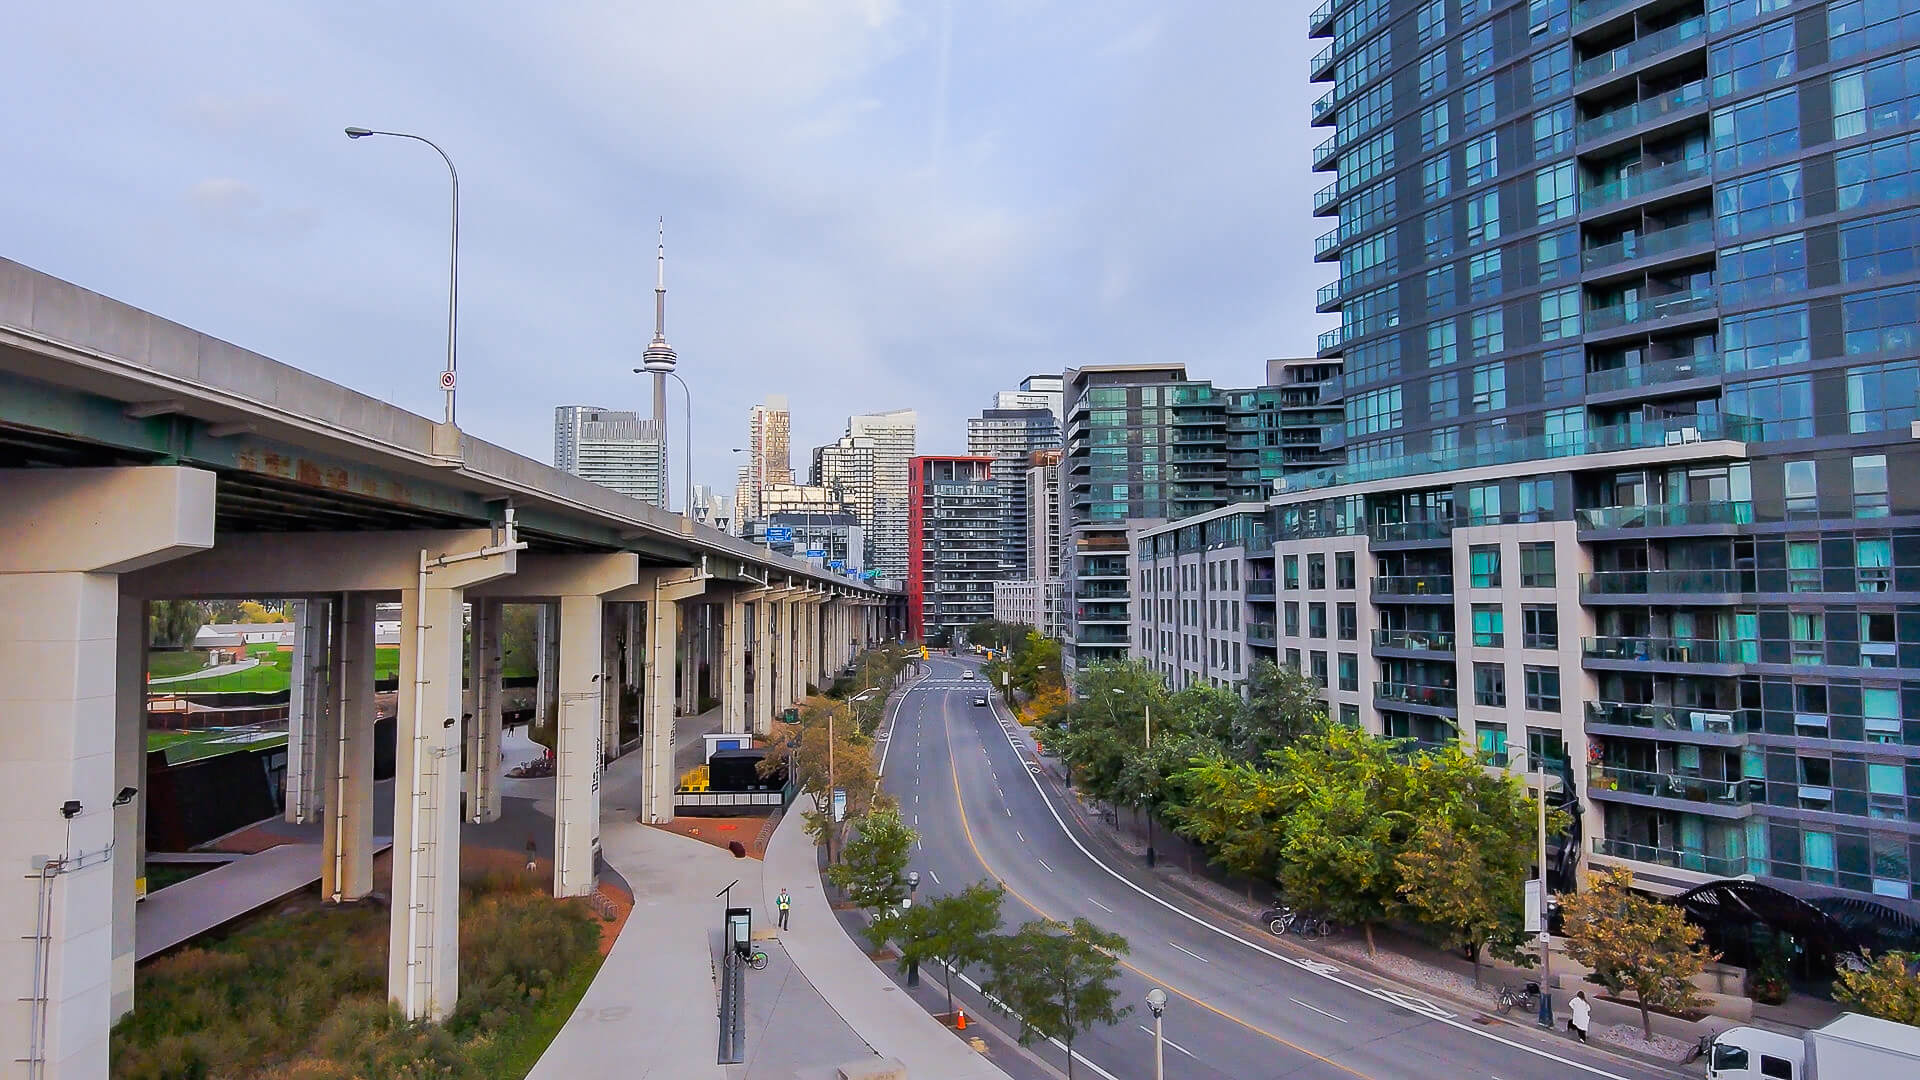 The Bentway, Toronto's public space project under an